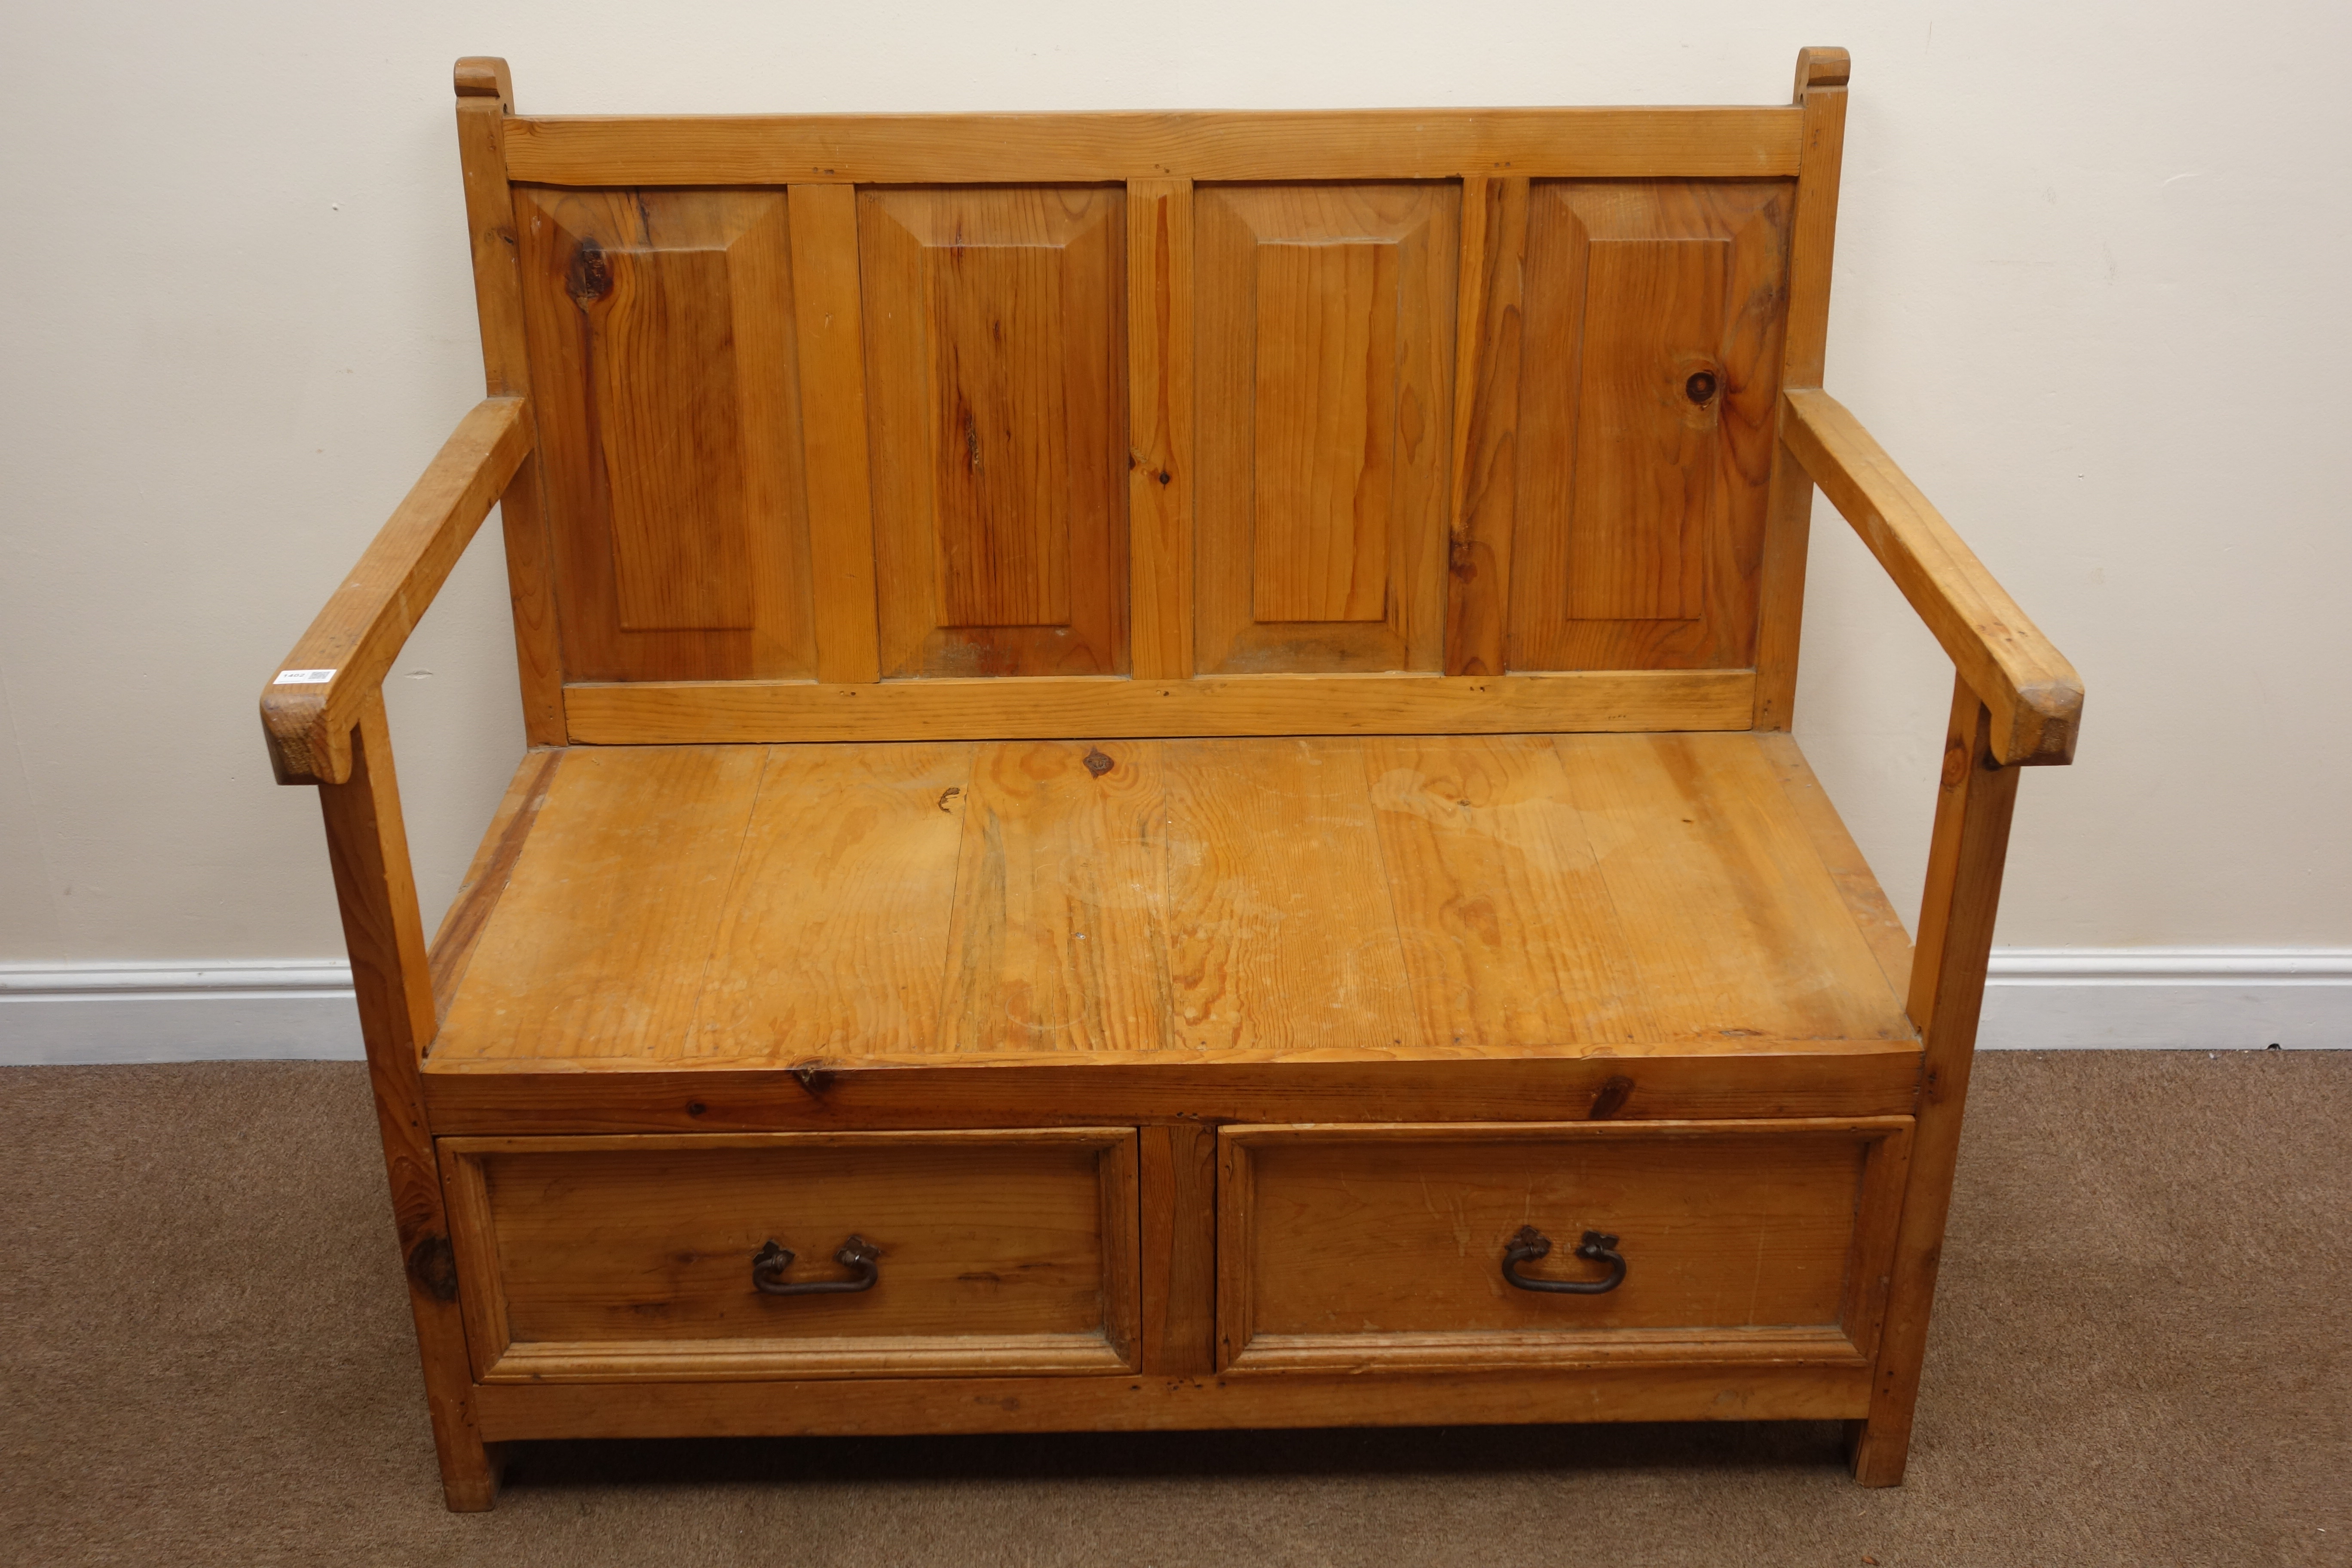 Waxed pine Monks bench, four panel back, solid seat, two drawers, stile supports, - Image 2 of 3